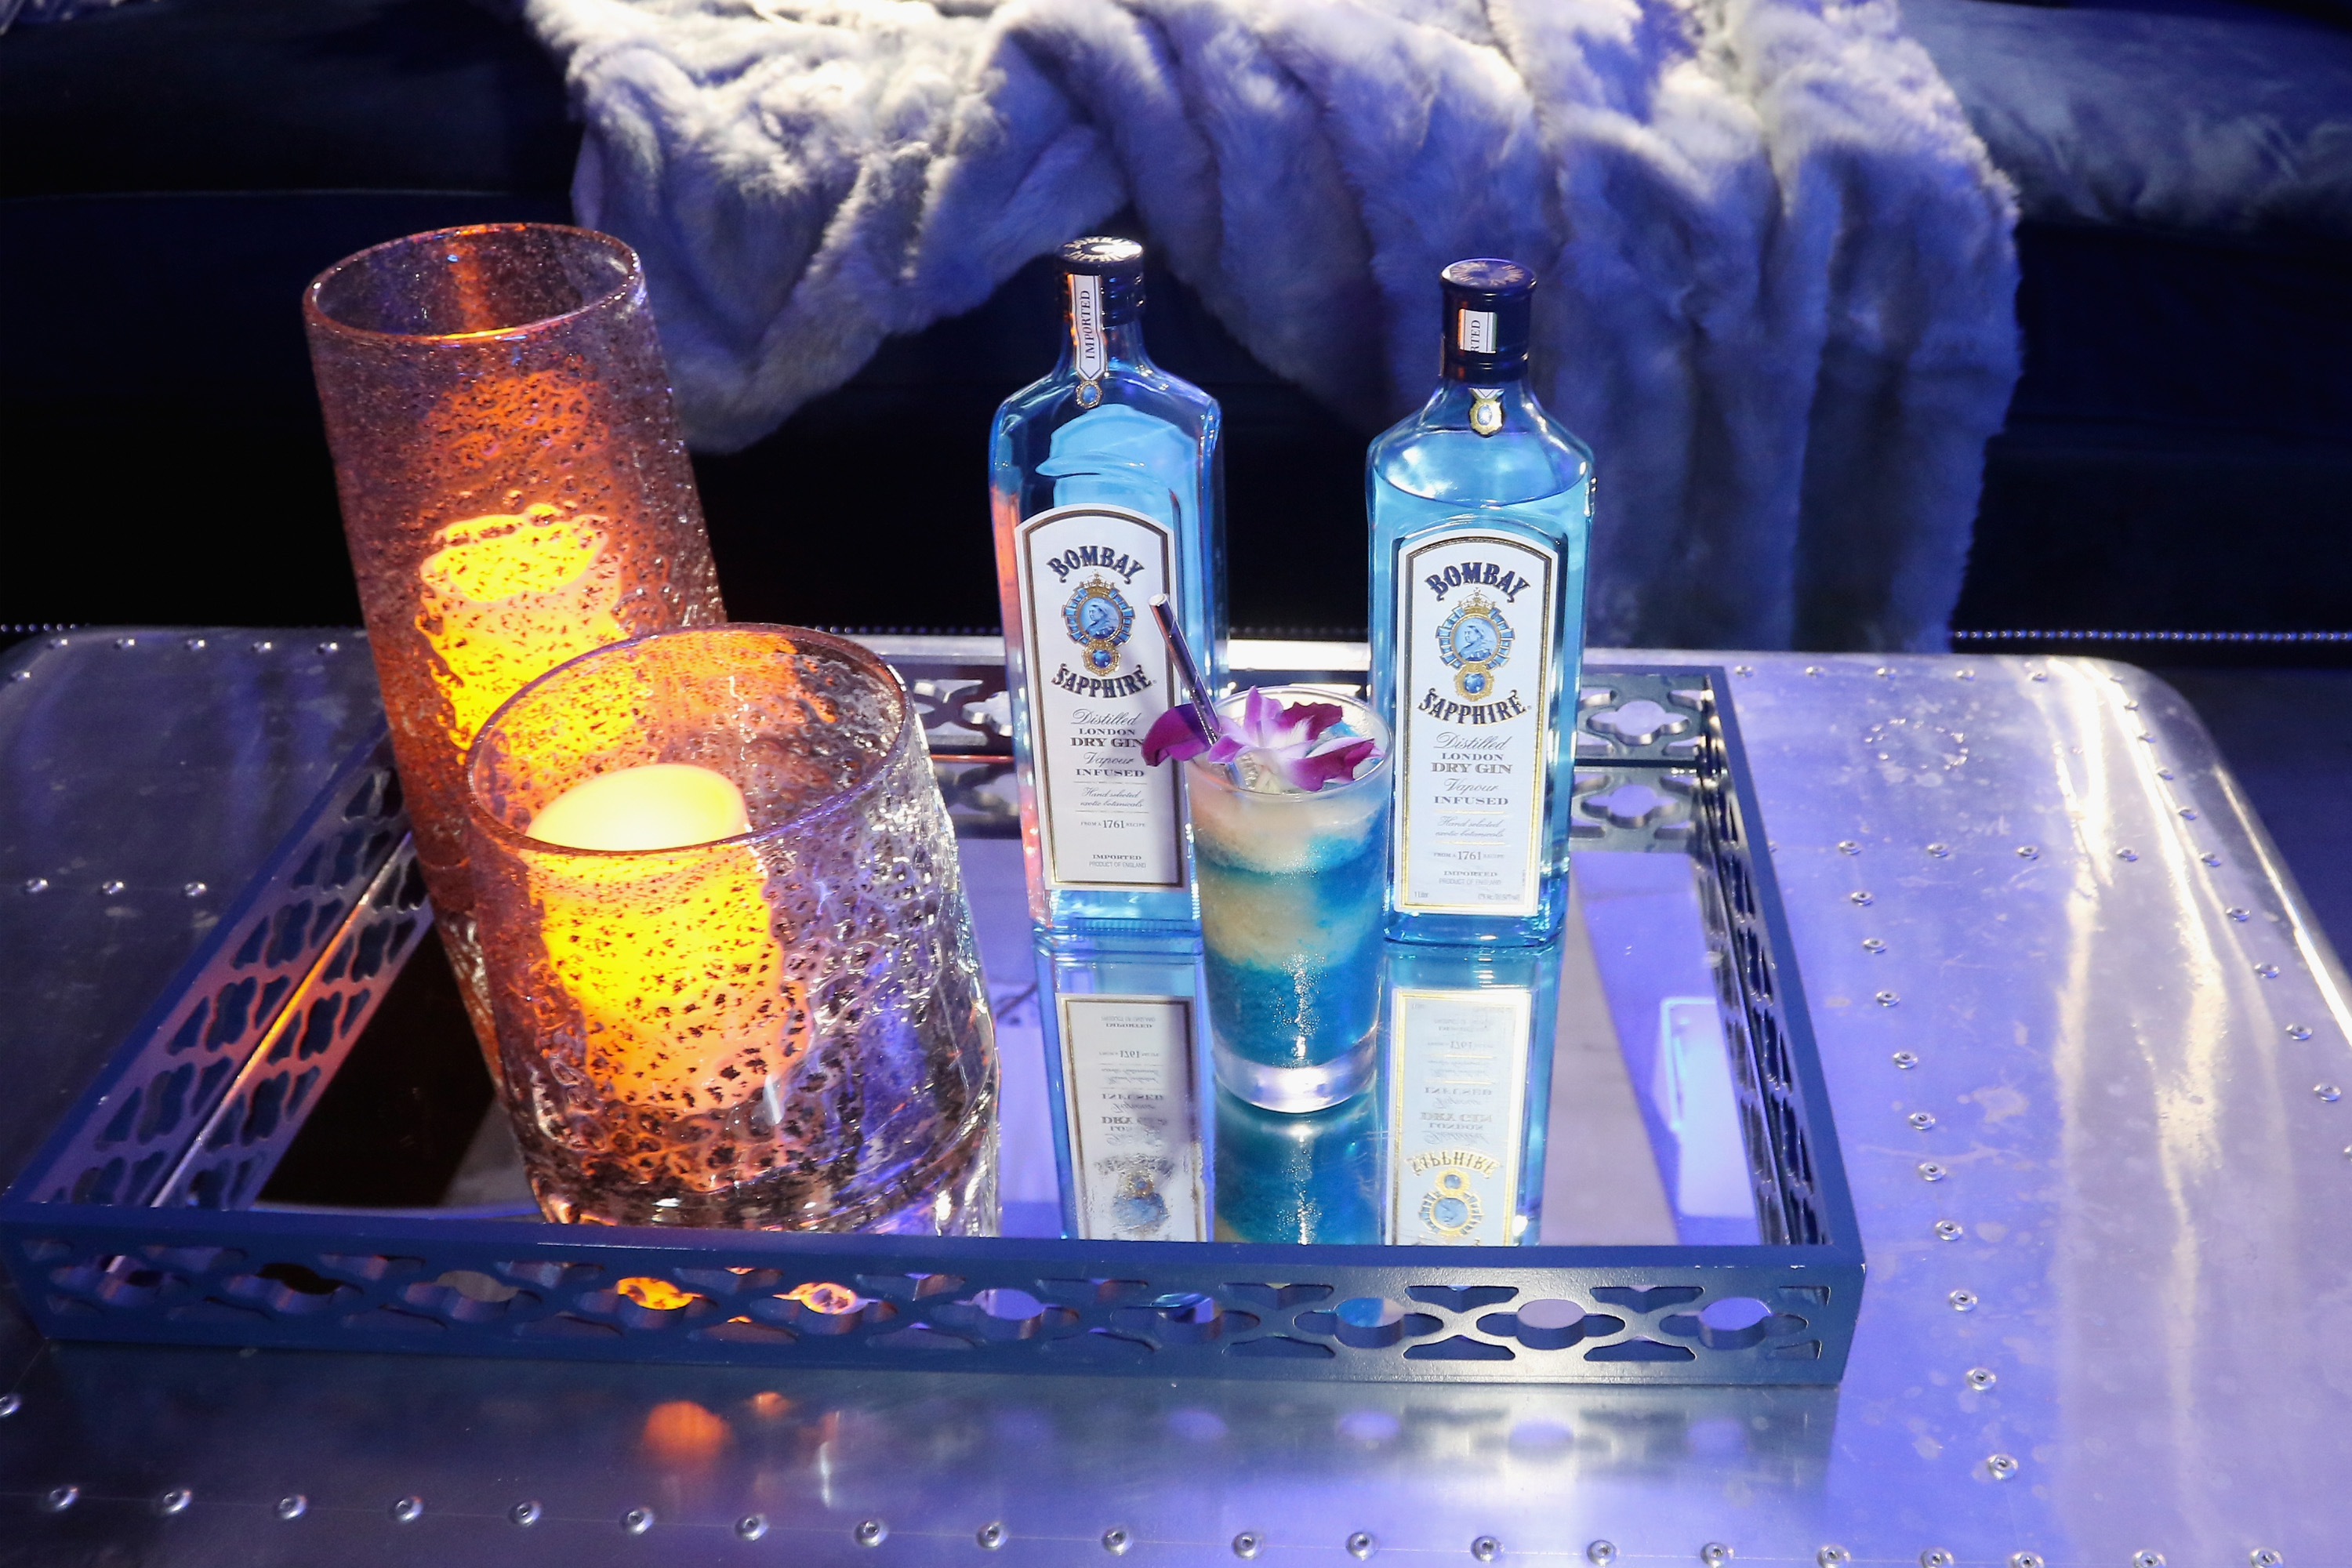 MIAMI, FL - DECEMBER 01:  Bombay Sapphire beverages on display during the 7th Annual Bombay Sapphire Artisan Series Finale hosted by Russell and Danny Simmons at 11 11 Road on December 1, 2016 (John Parra&mdash;Getty Images for Bombay Sapphire)